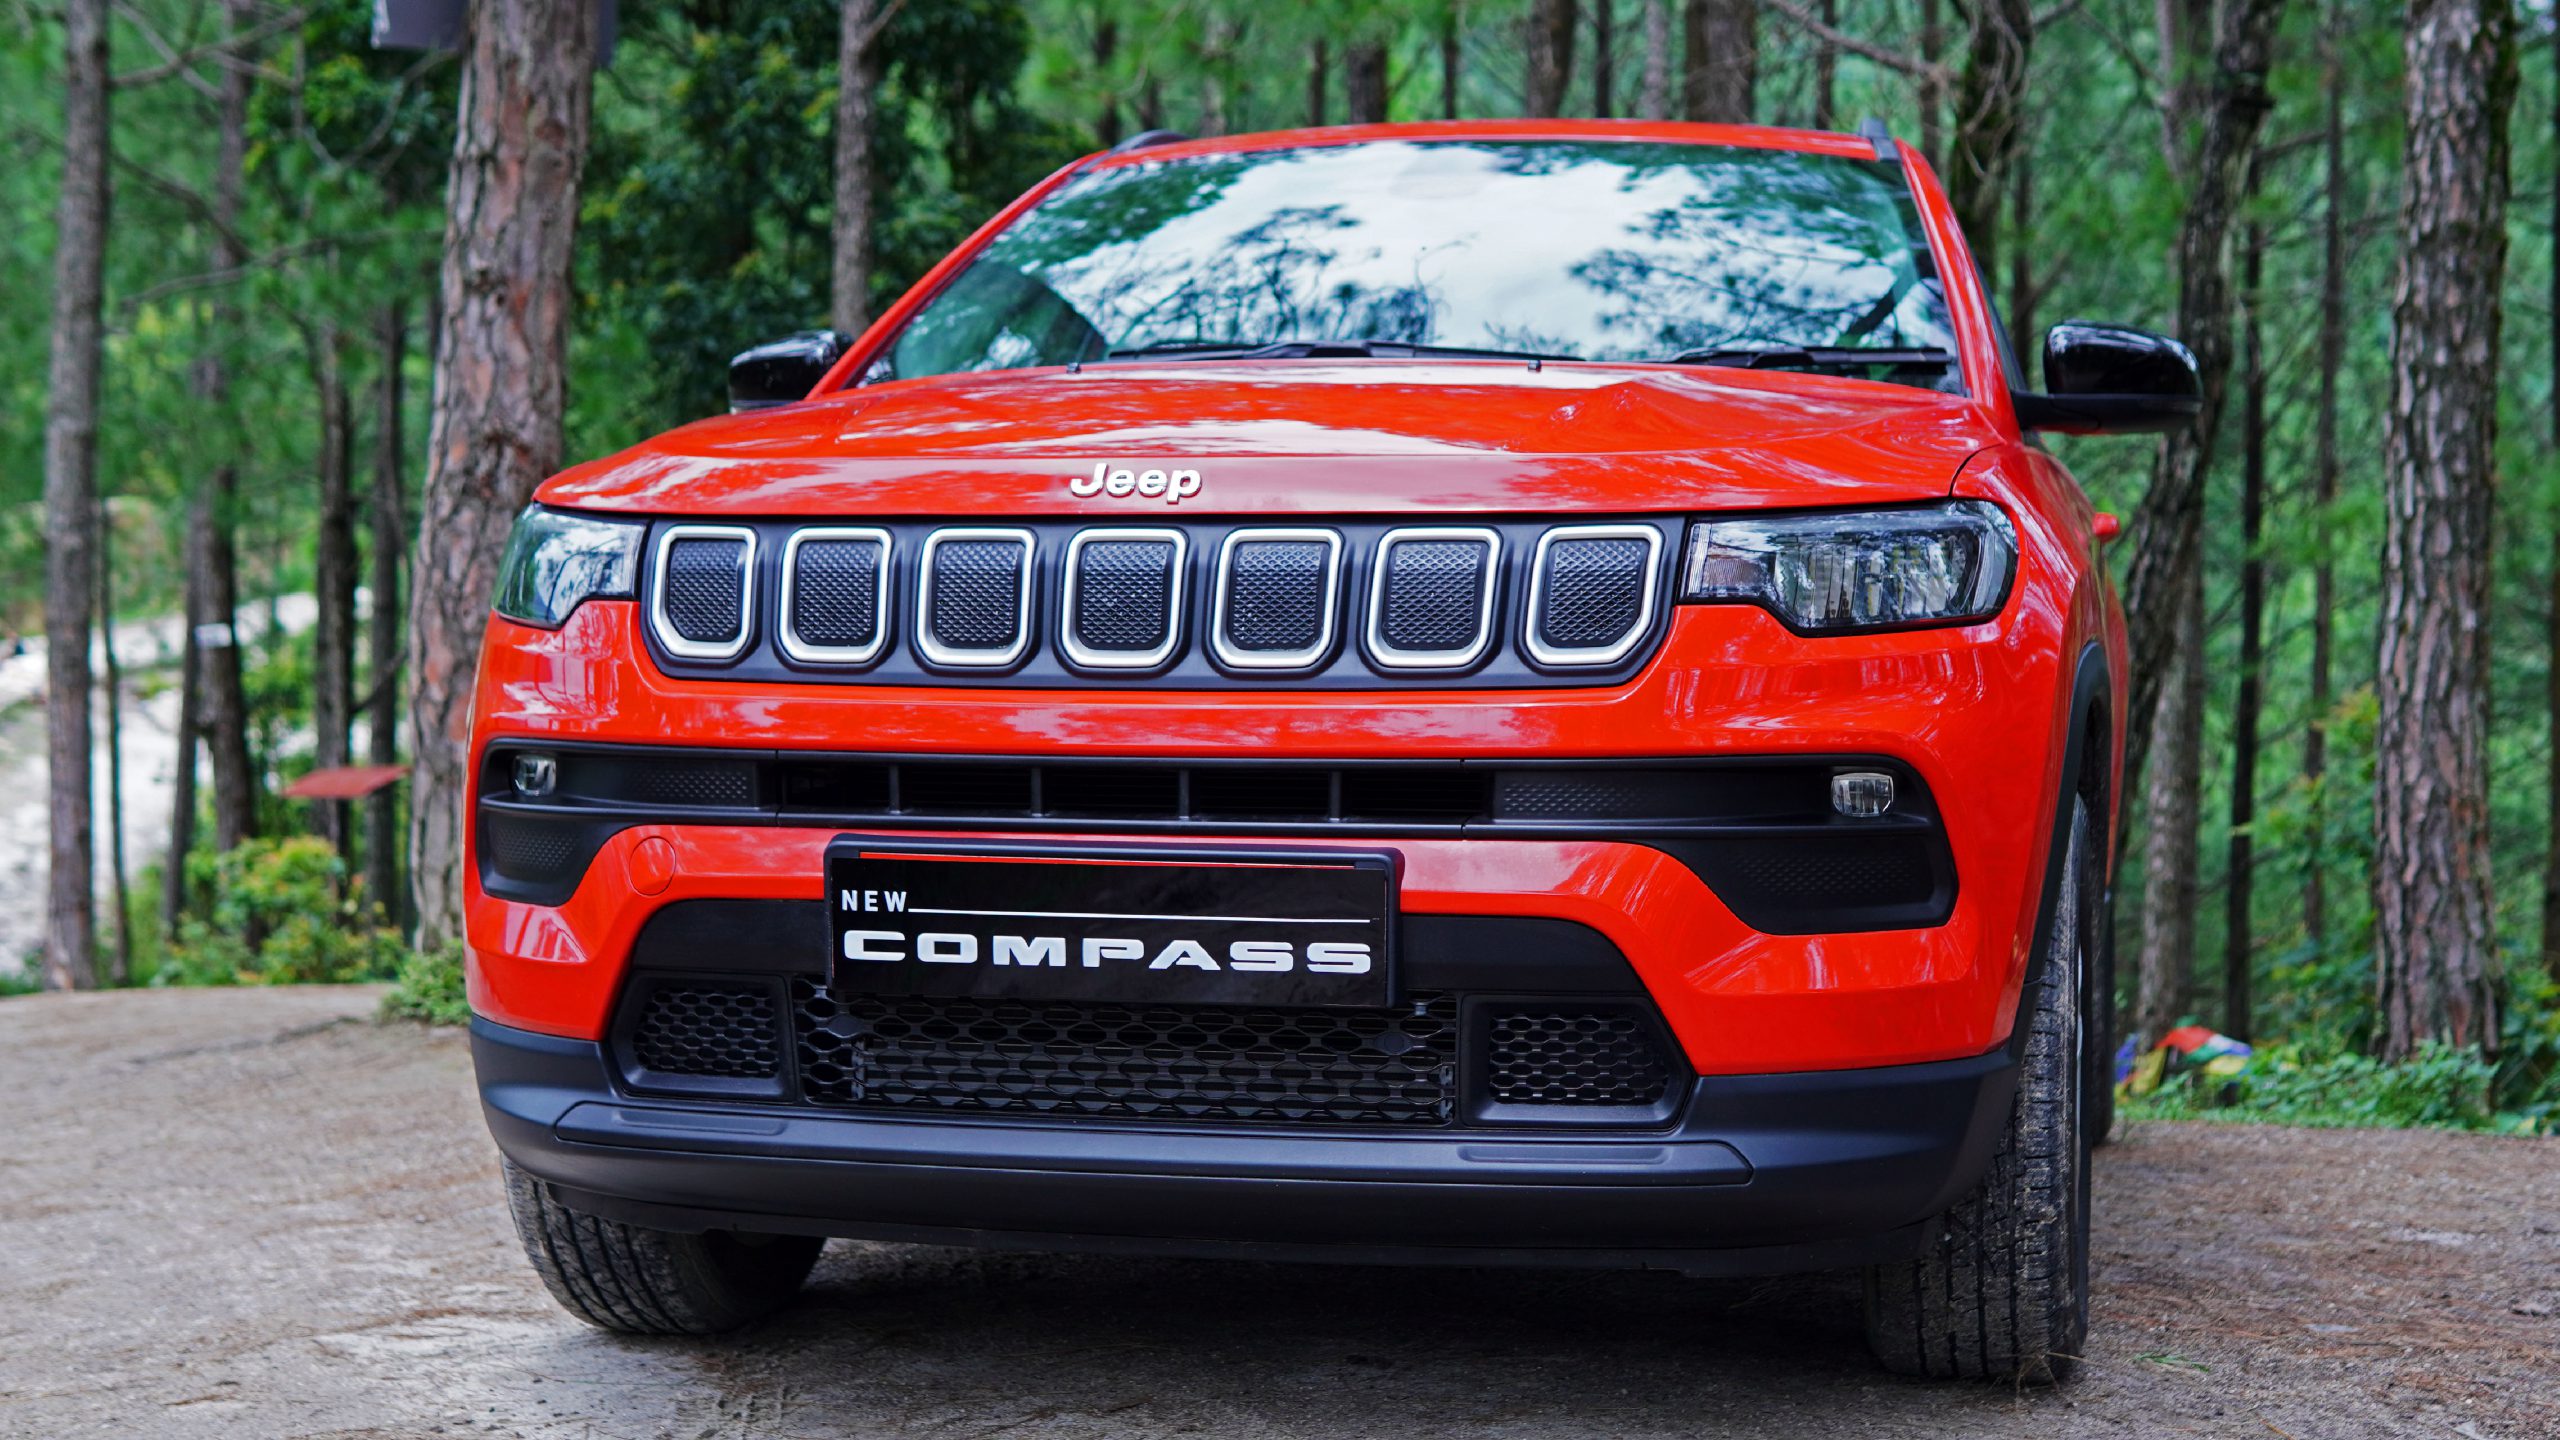 2021 Jeep Compass Front View